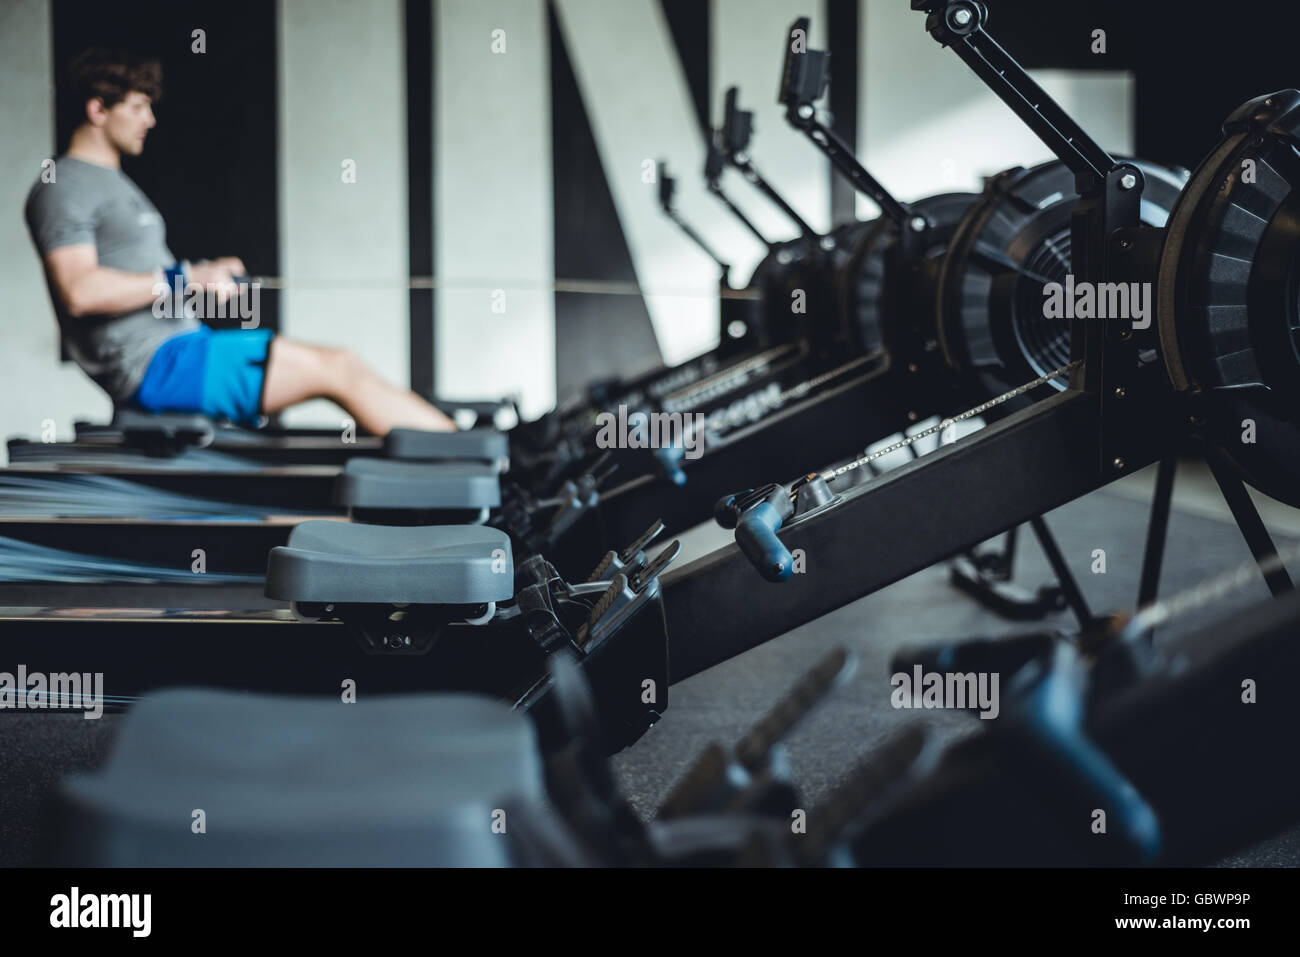 Man working out in gym on rowing machine. Stock Photo